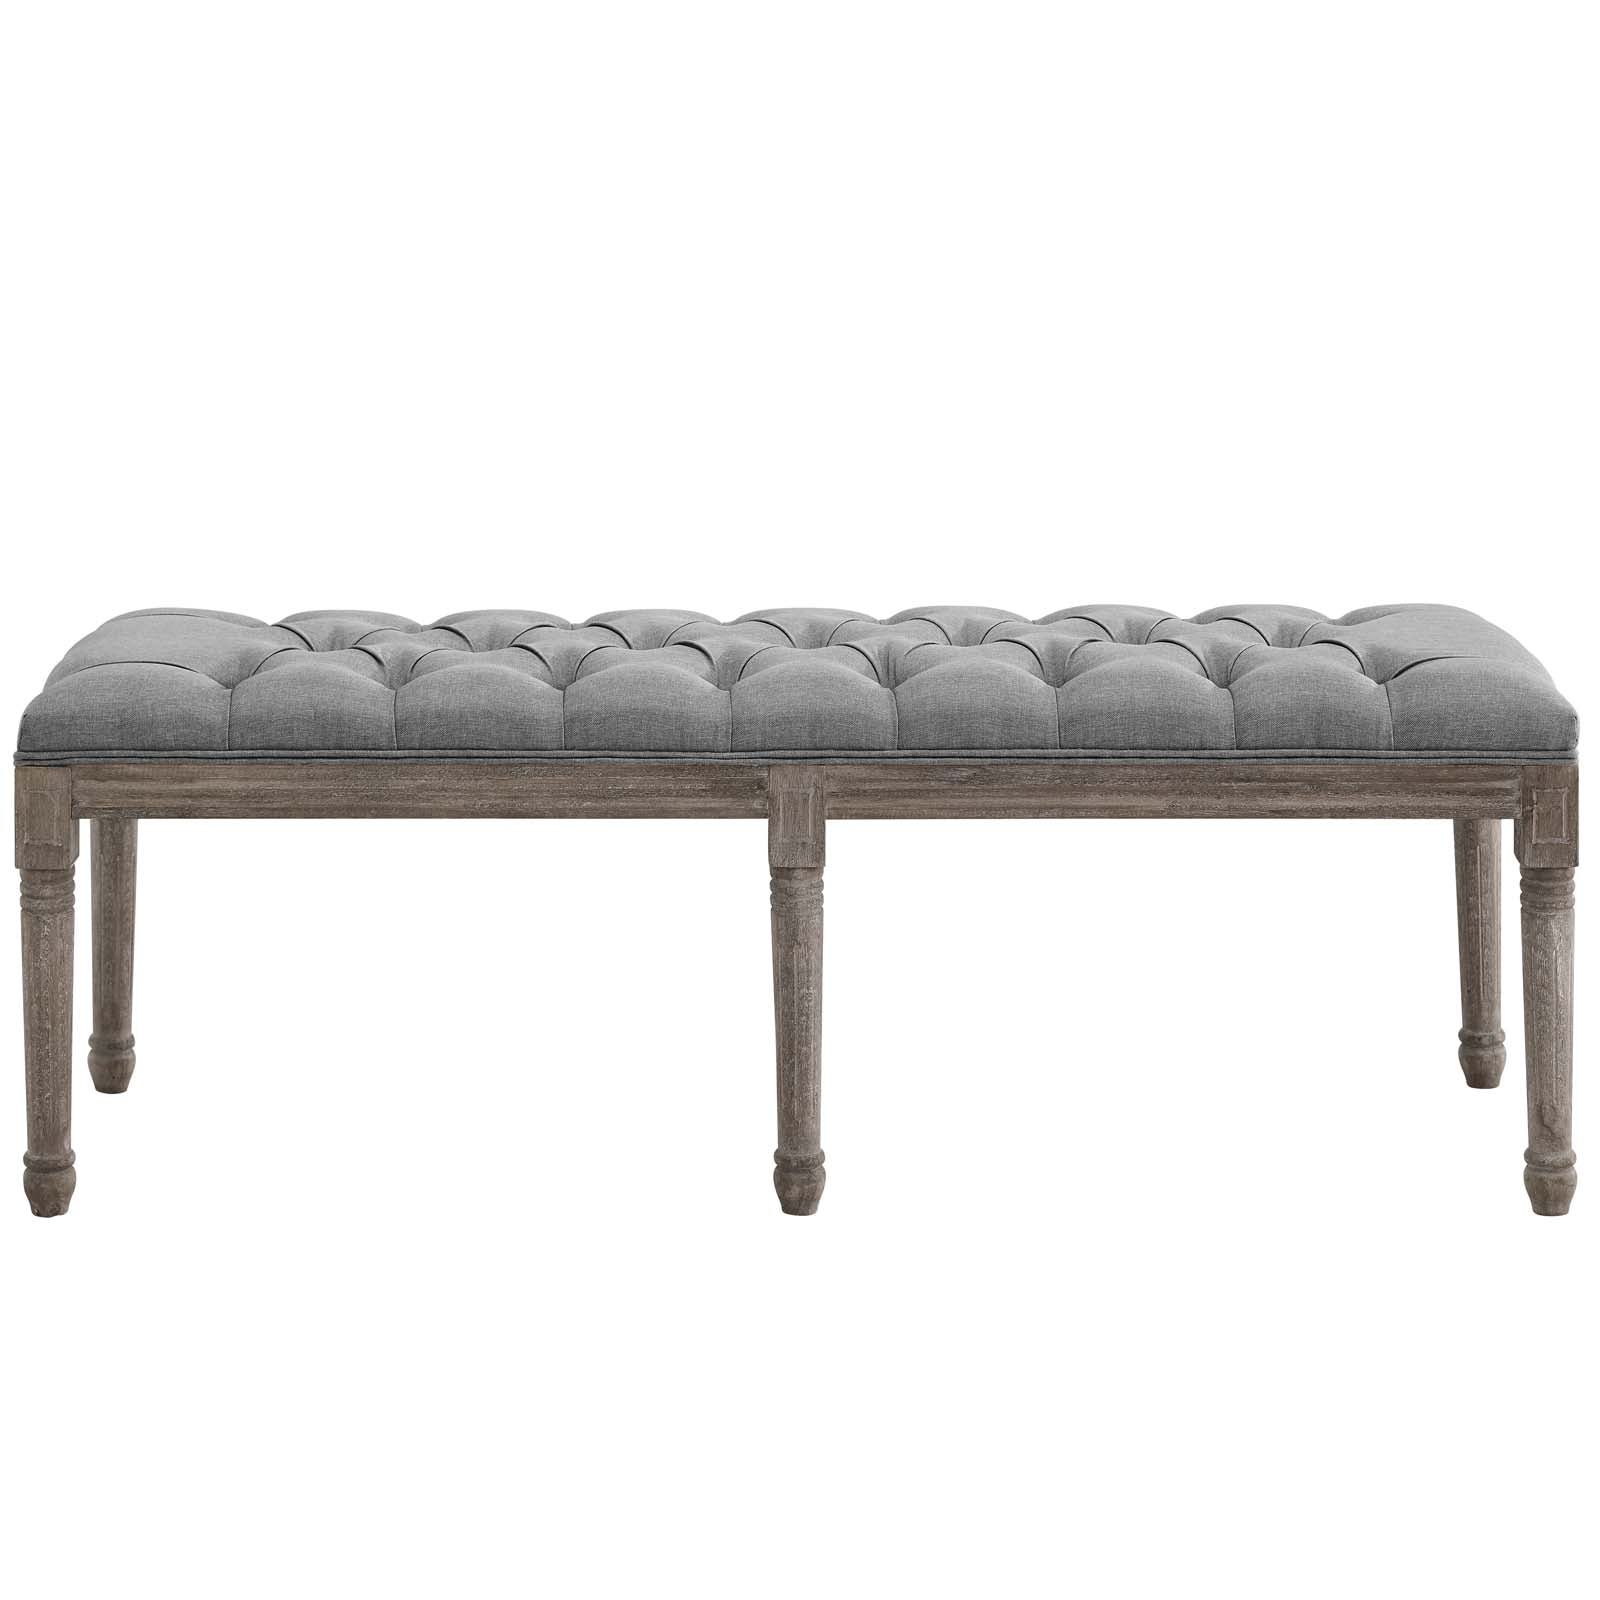 Modway Benches - Province French Vintage Bench Light Gray